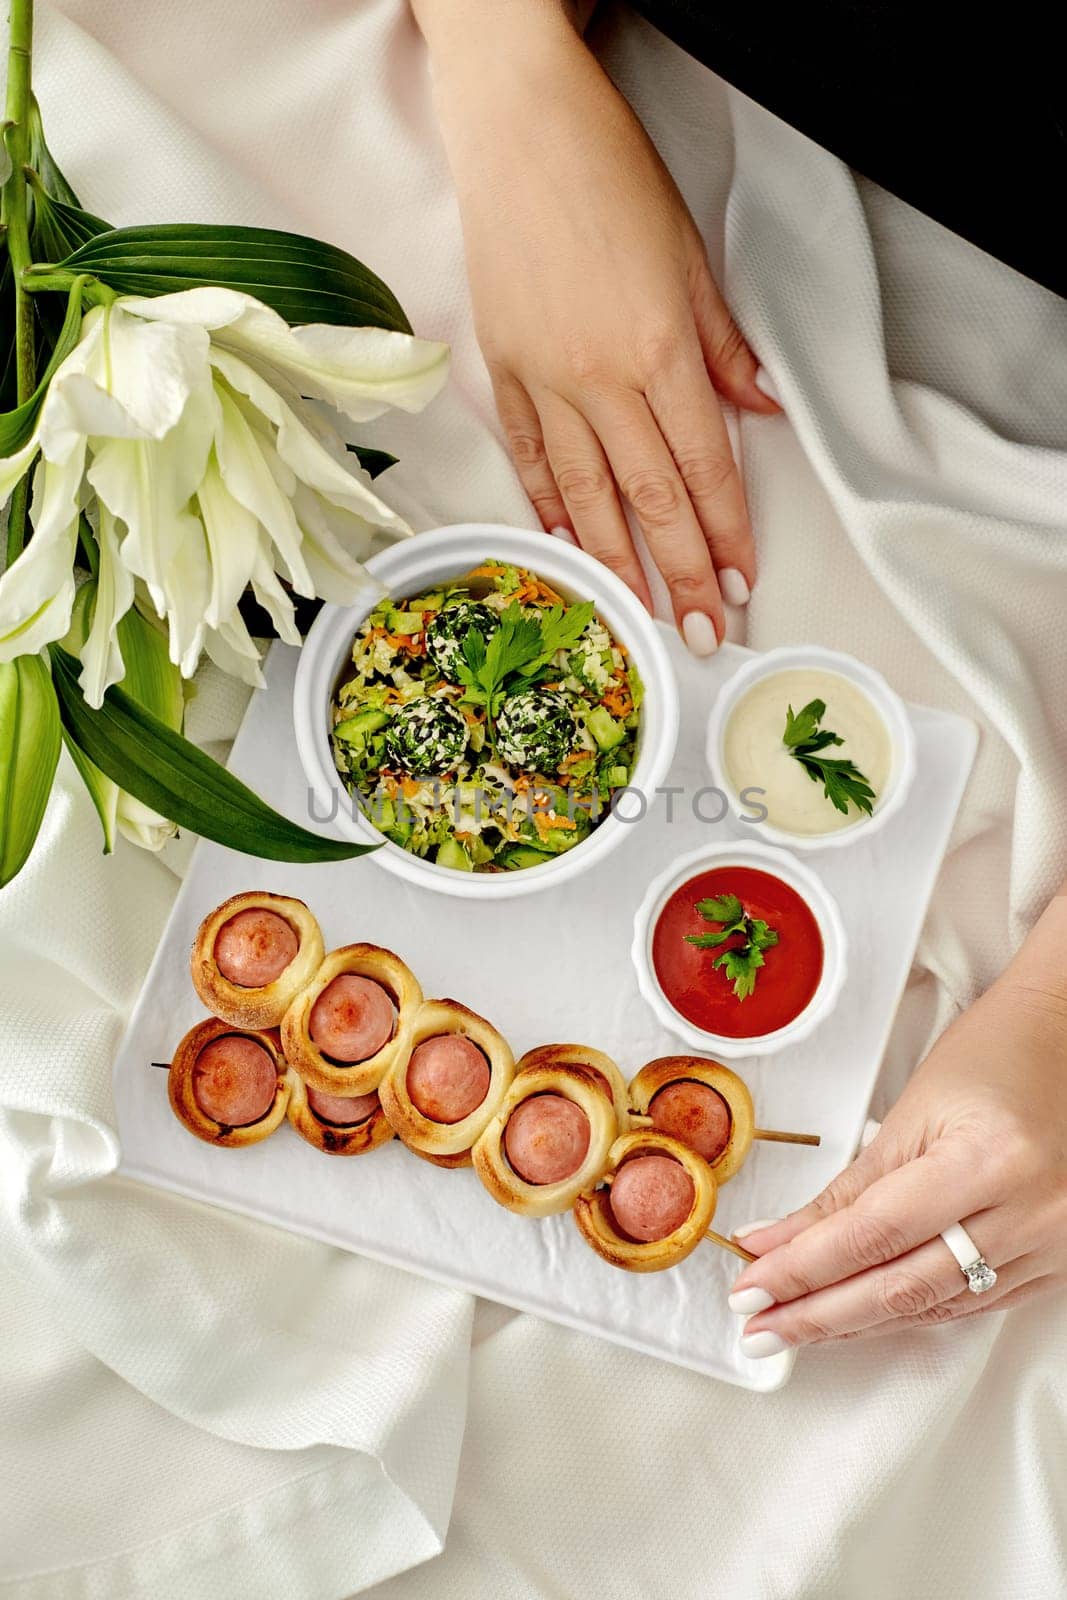 Female hand taking appetizing golden brown sausage rolls on skewers served on plate with vegetable salad and sauces against white tablecloth background decorated with fresh lilies